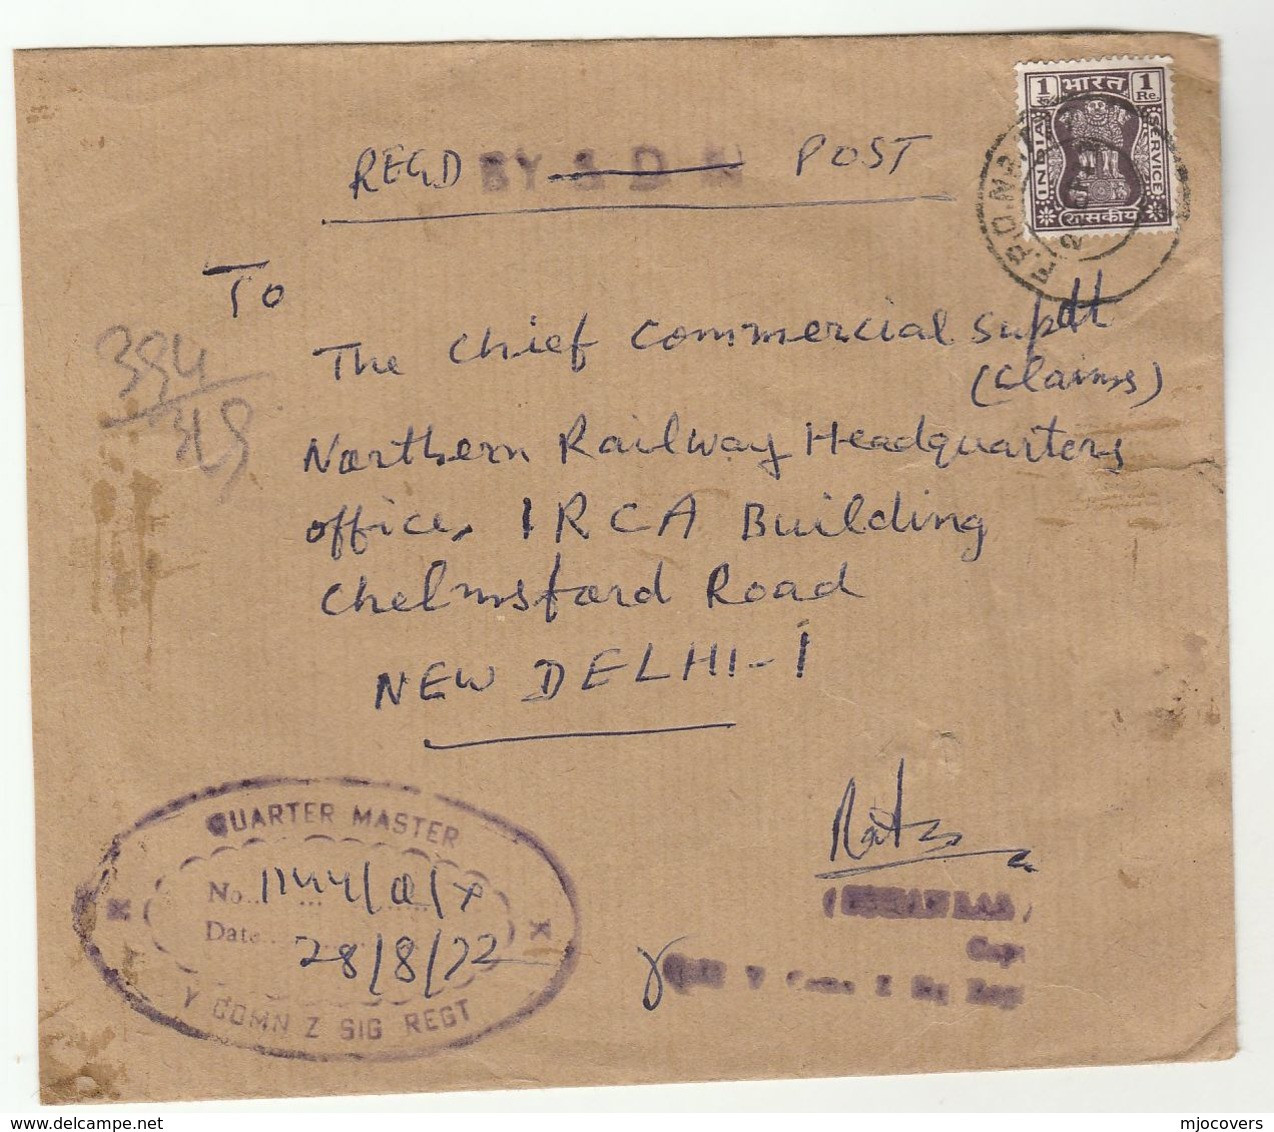 1972 INDIA FORCES To NORTHERN RAILWAY Train REGISTERED FPO 777 Quarter Master Y COMN Z SIG REGT Military Signals Cover - Dienstmarken